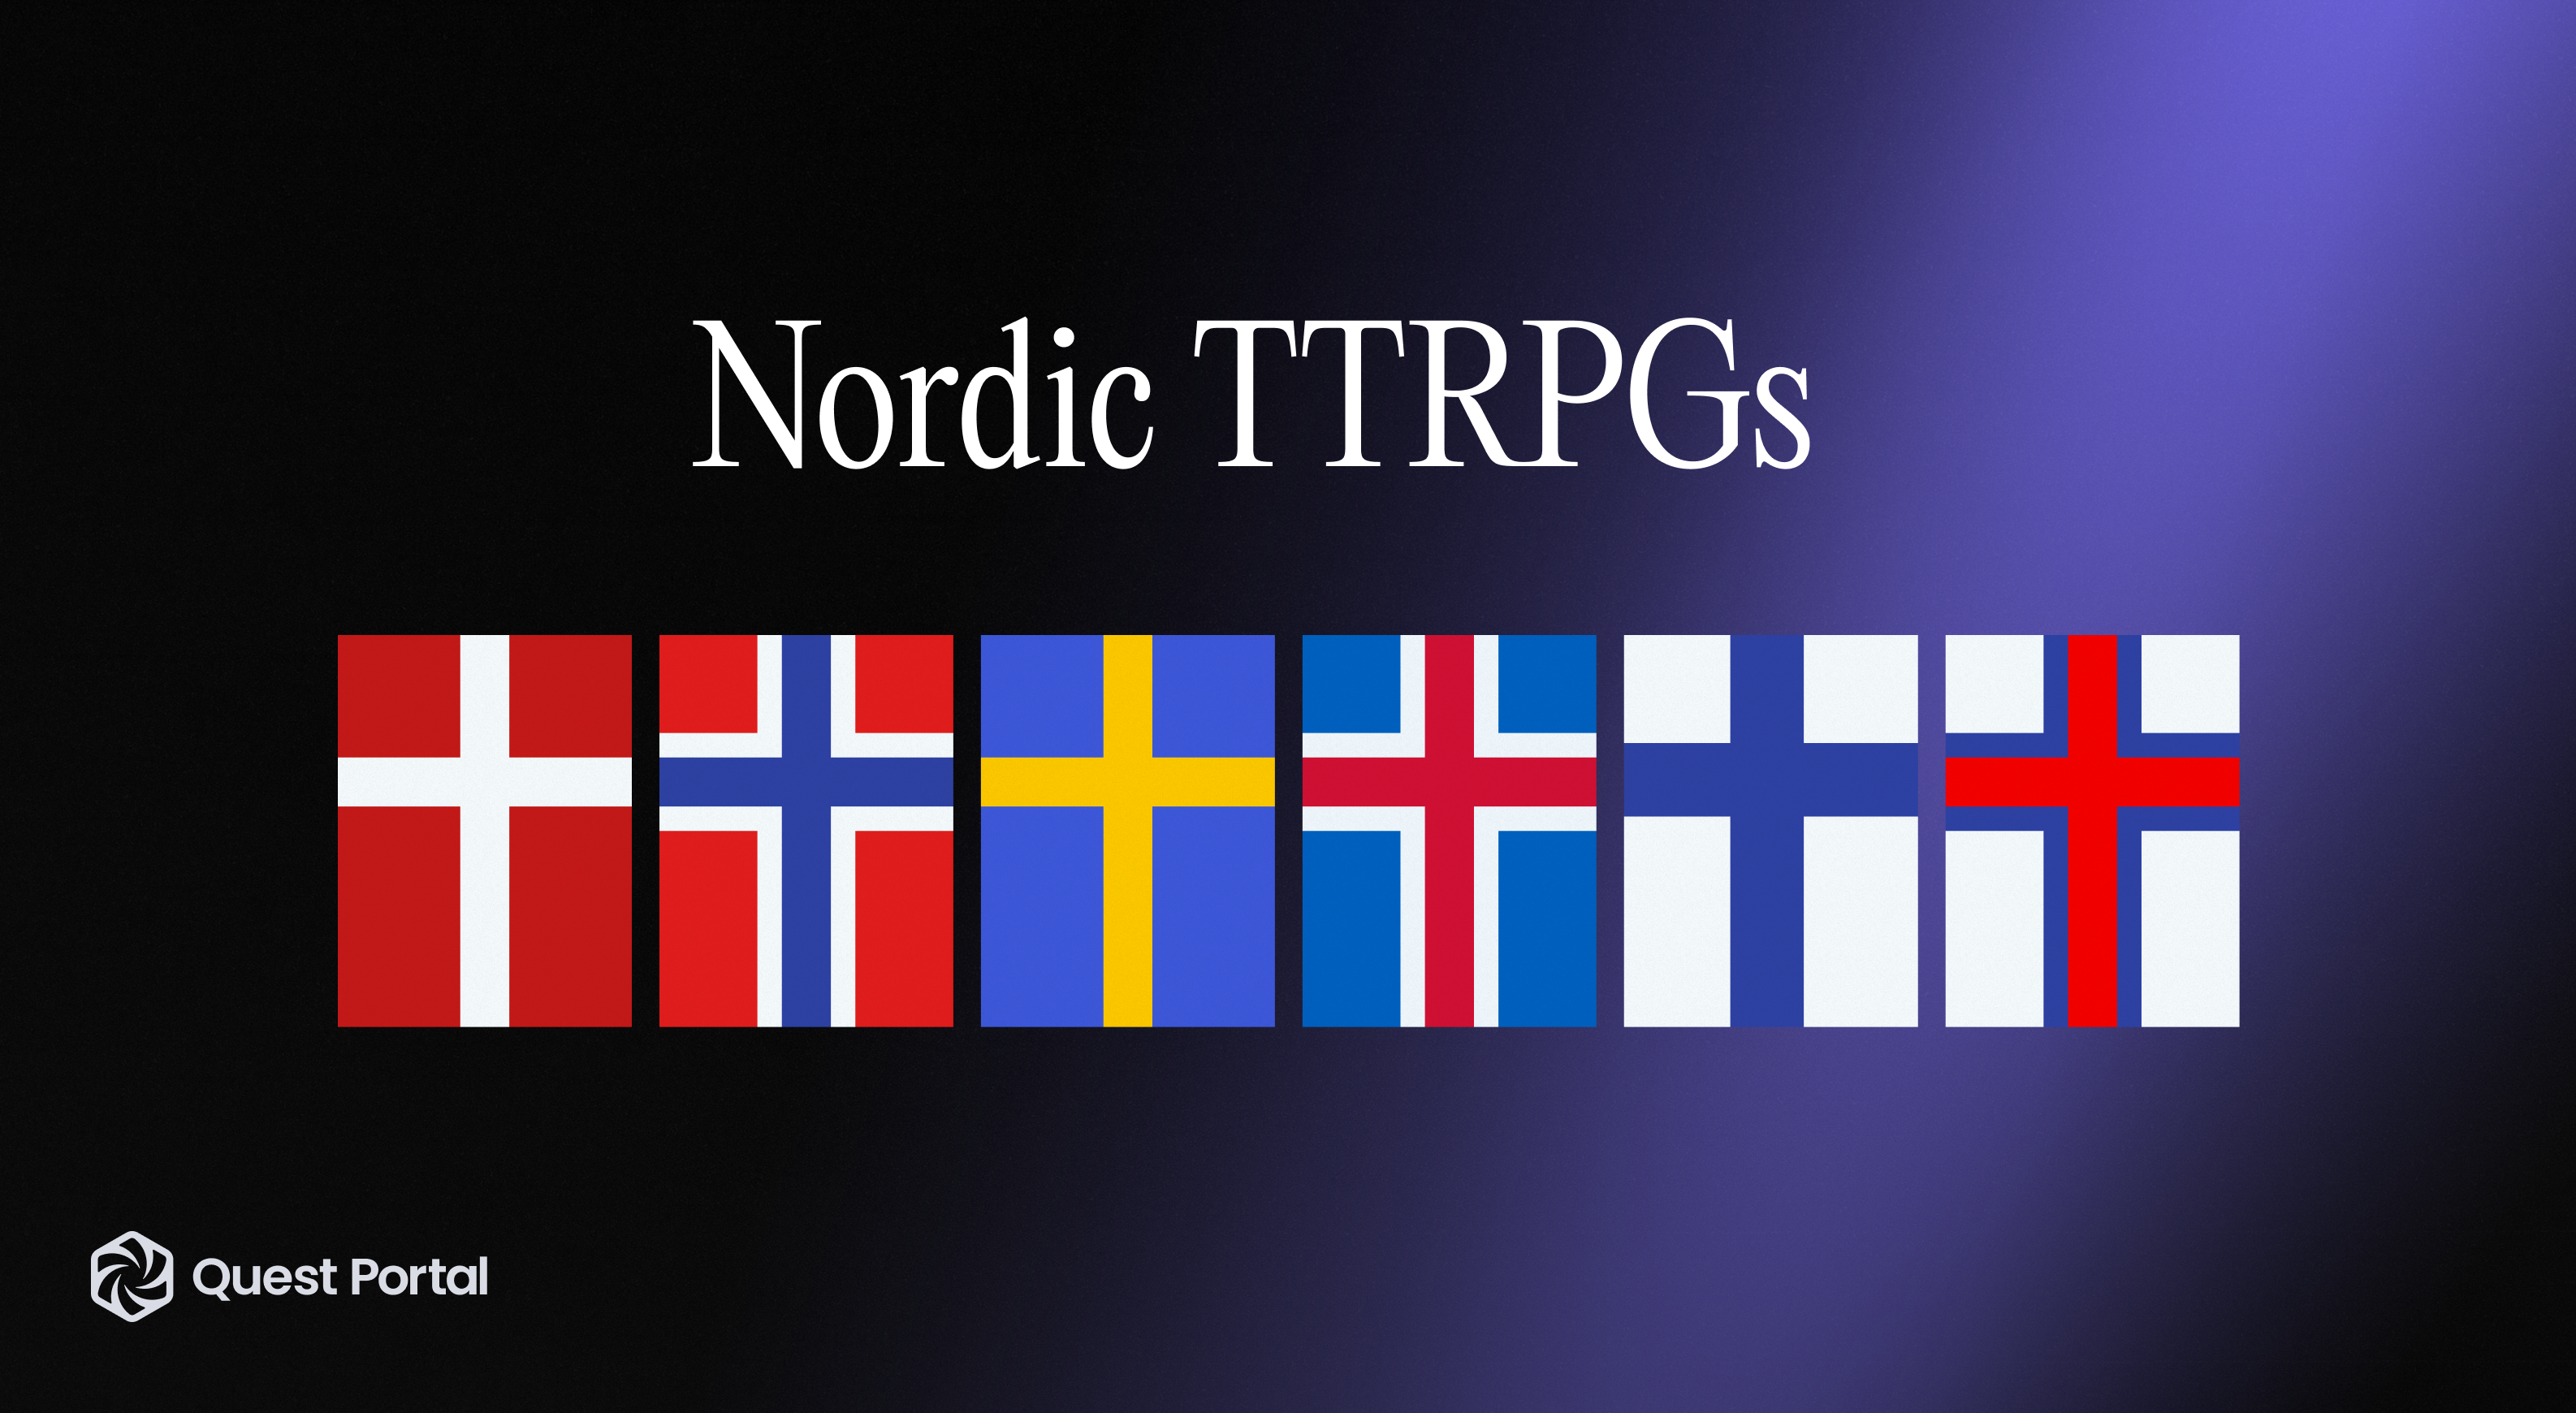 Tabletop Roleplaying games from the Nordic countries.